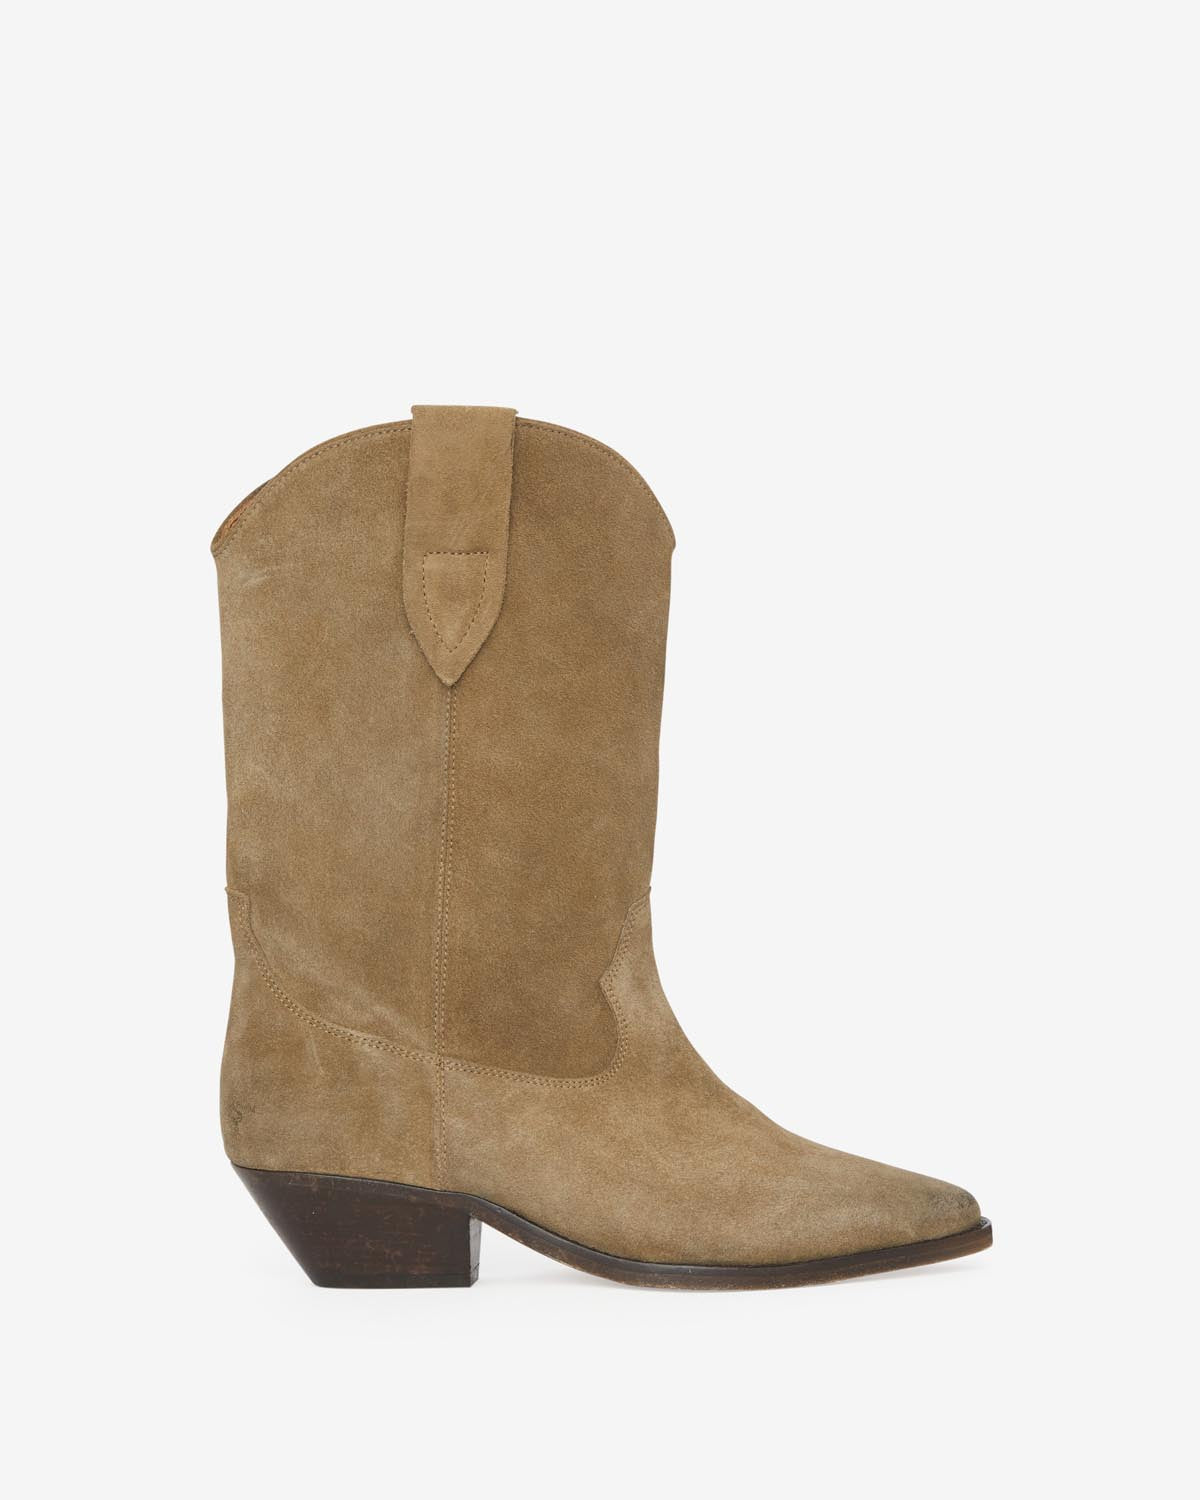 Stiefel duerto Woman Taupe 5